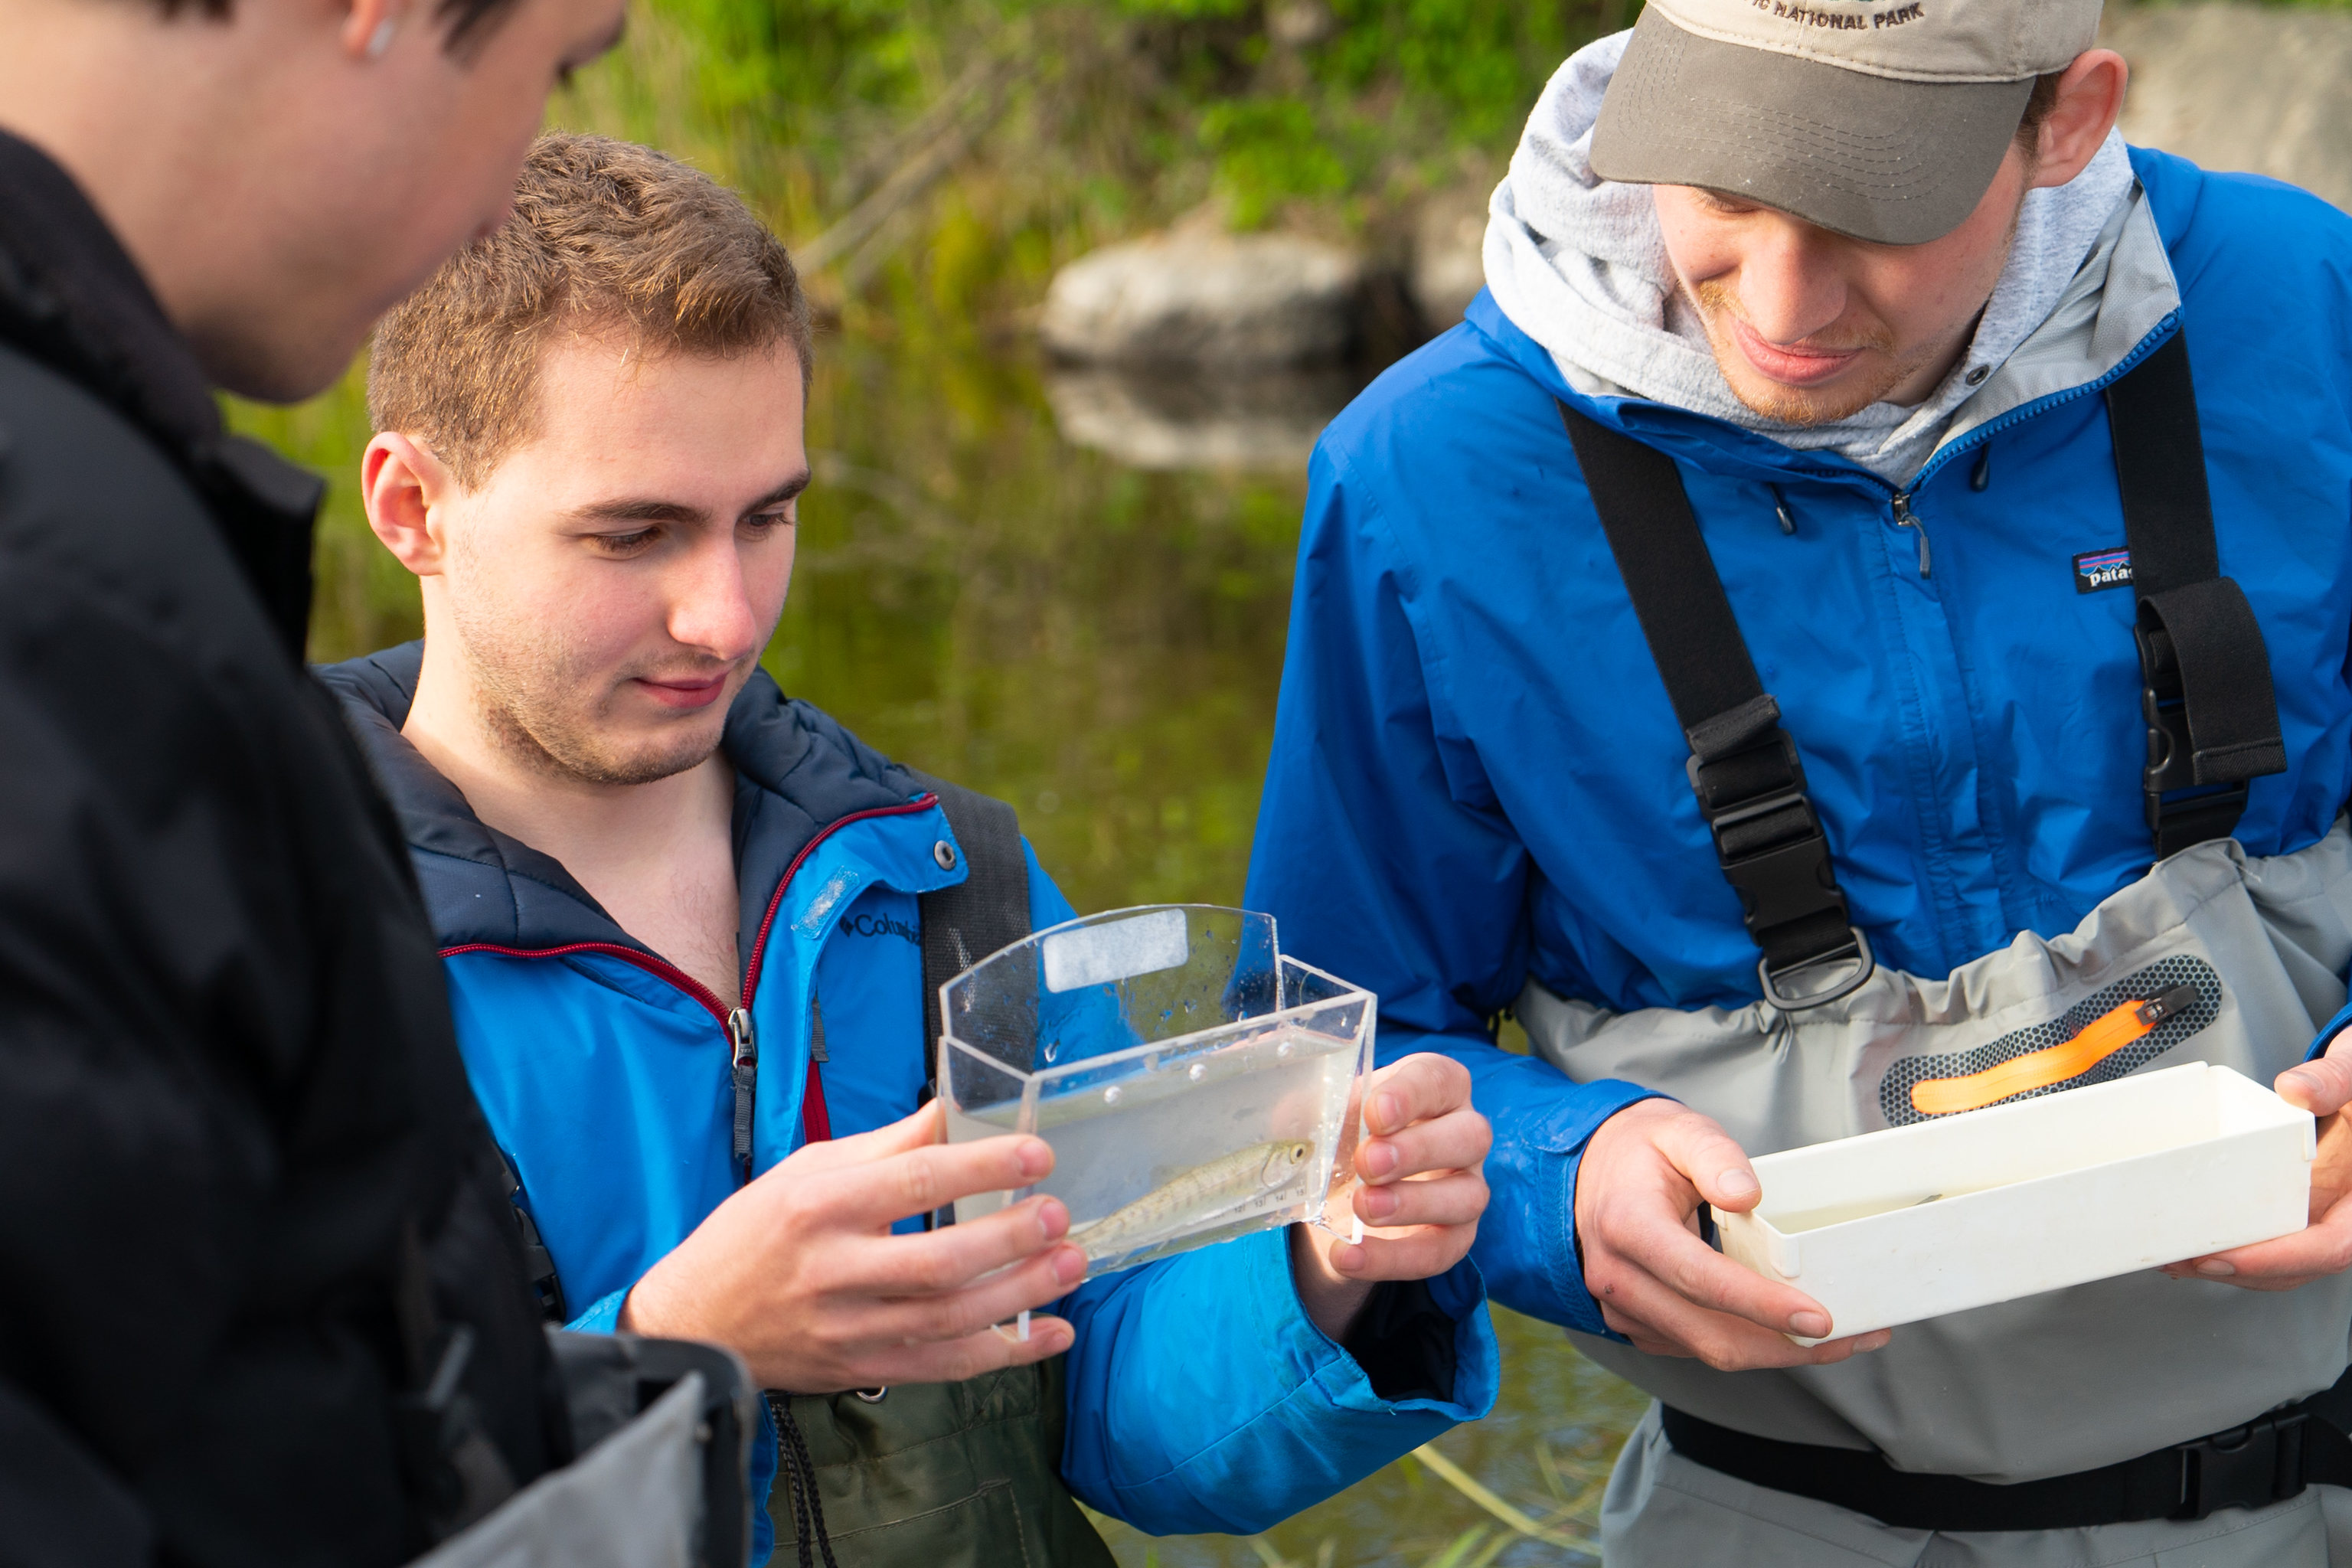 Two students wearing waders examine a small fish as part of the Elwha restoration project.